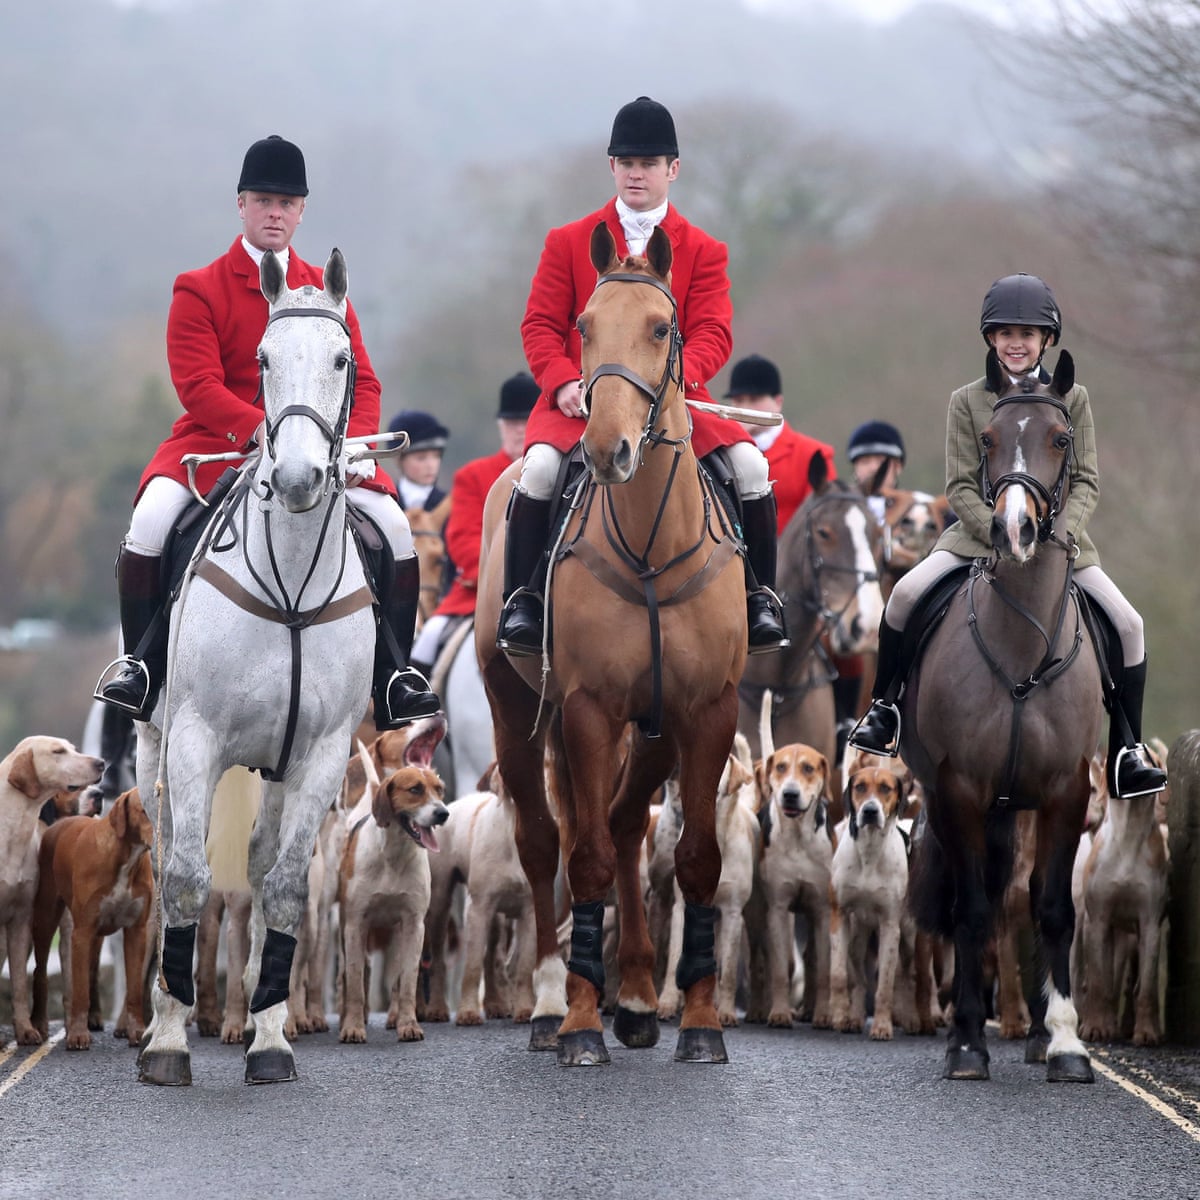 If you're one of these nasty little animal abusers, who breeds dogs that are kept in disgusting conditions all their lives, starved & taught to tear foxes to death, just fuck the fuck off our planet, you violent entitled scumbag! 
#FoxHunting #C4News